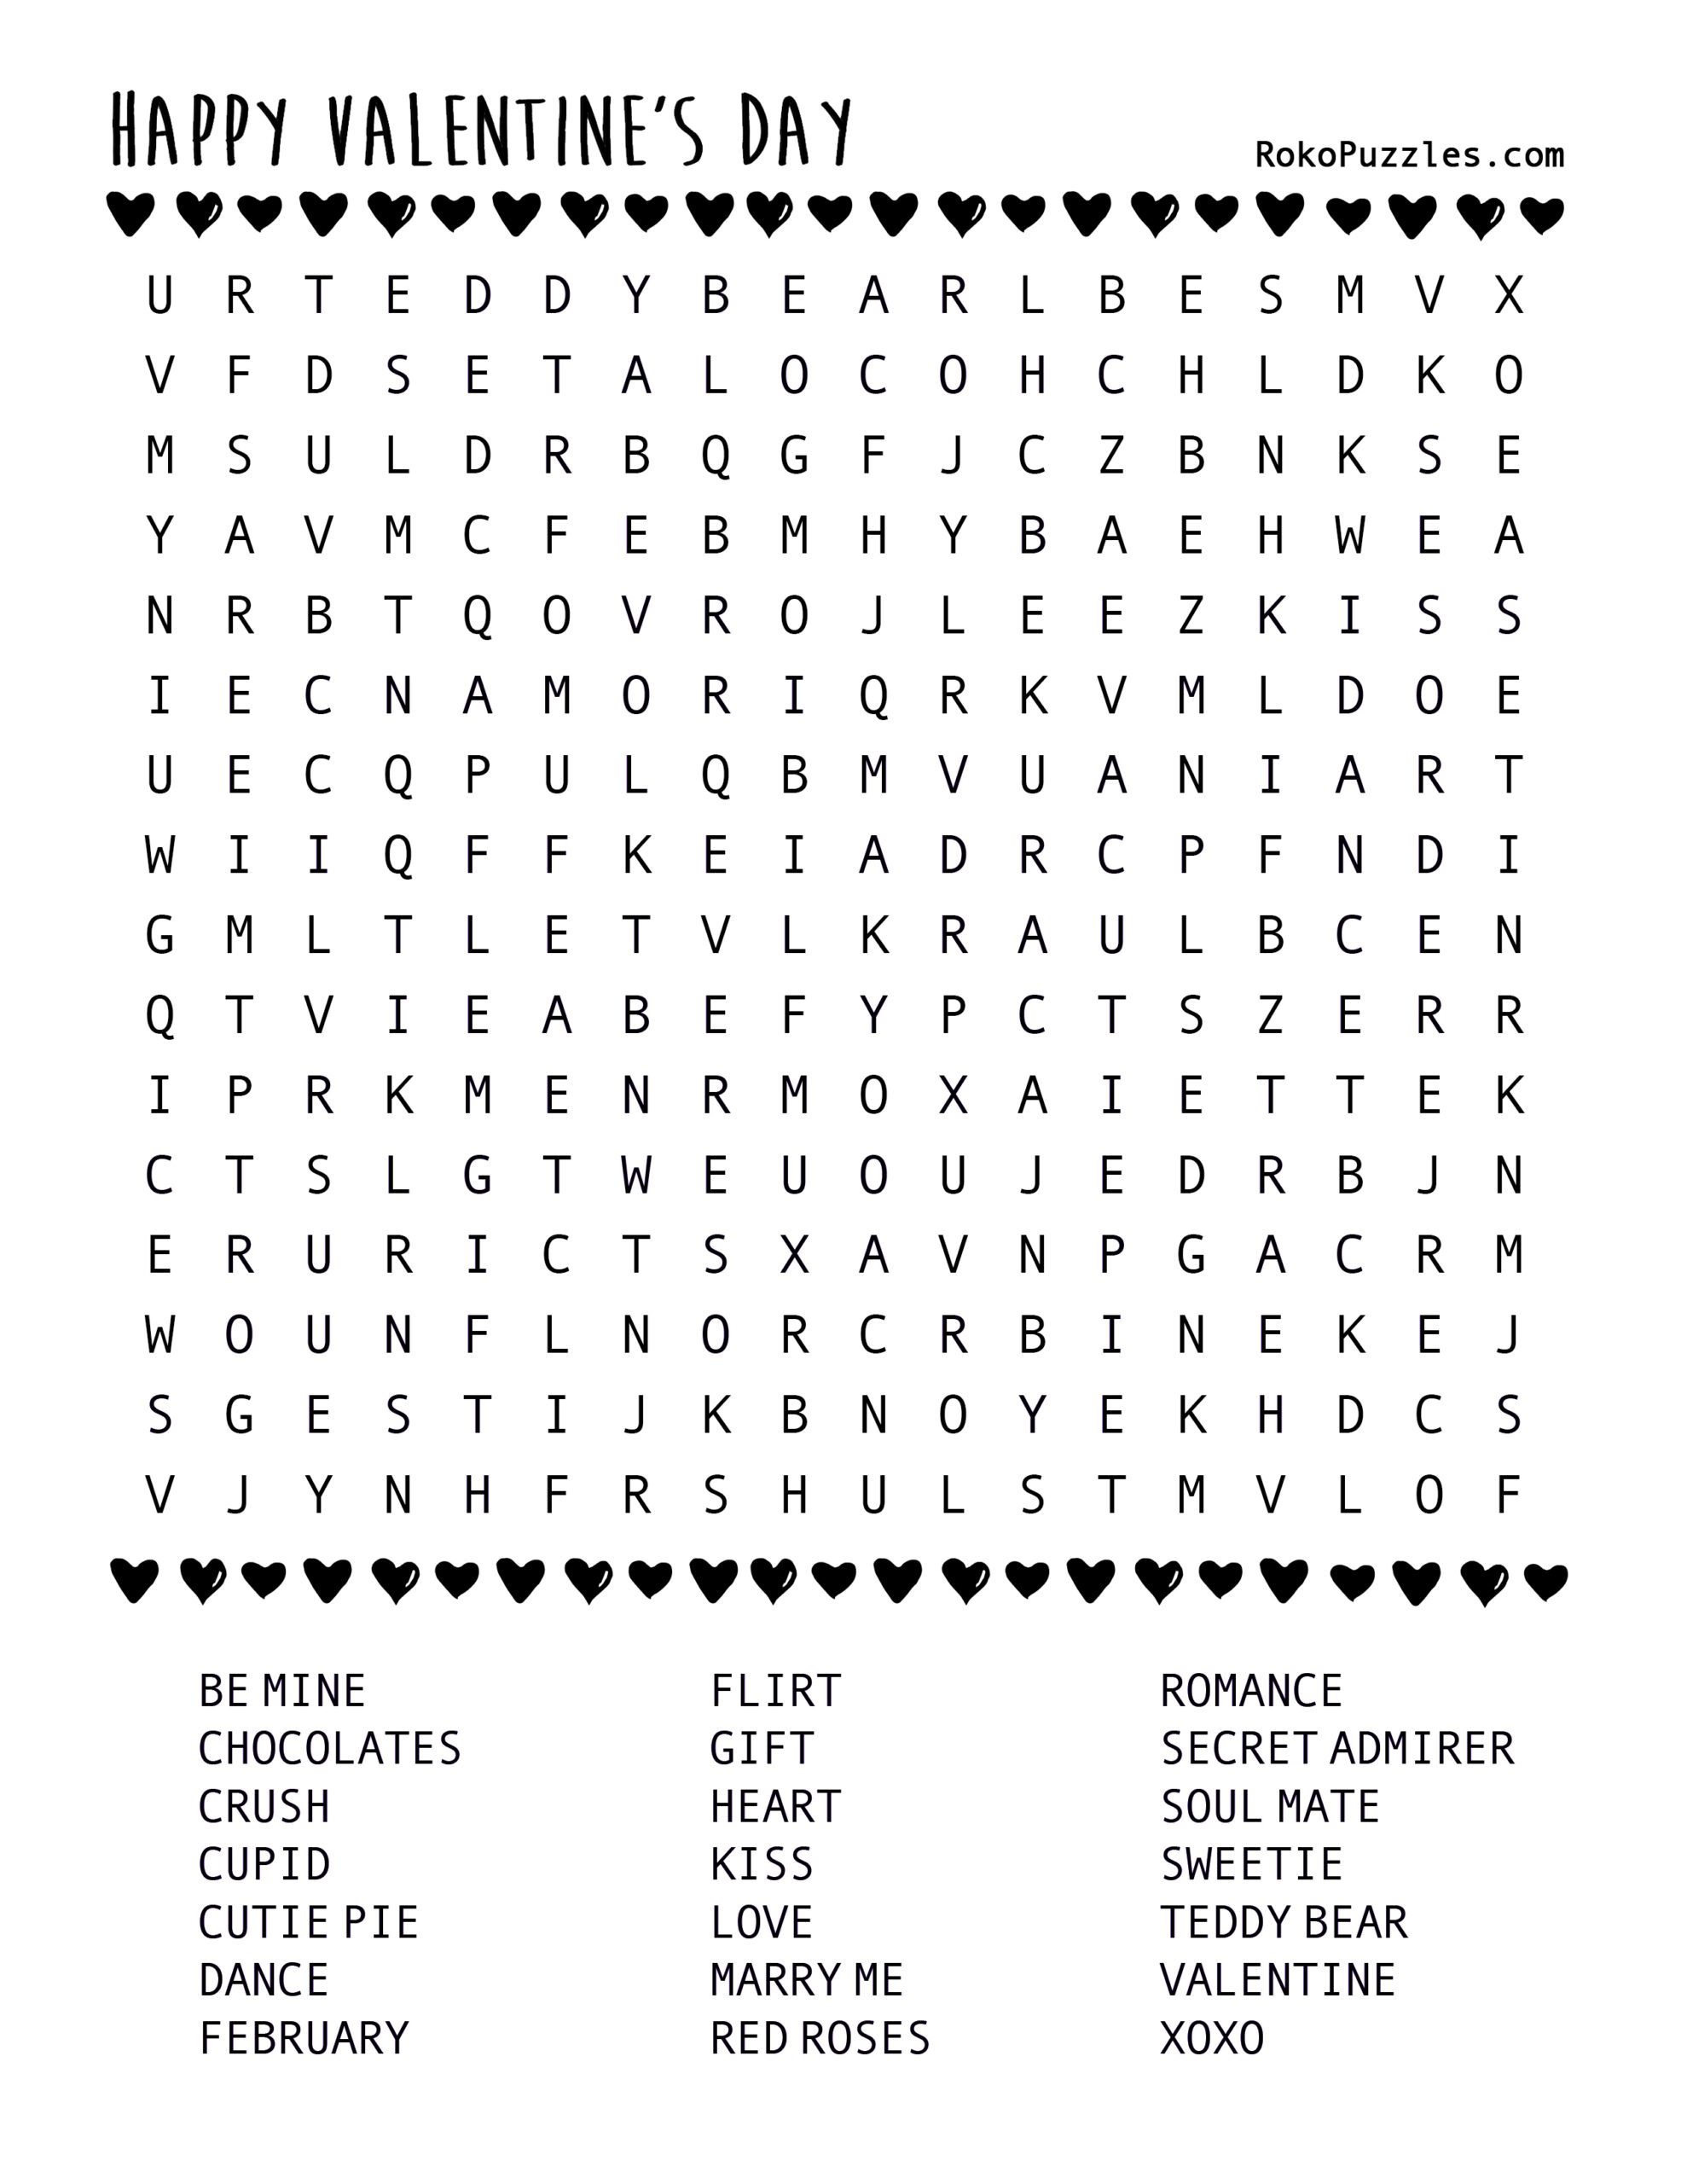 Valentine s Day Word Search Free Printable Download RokoPuzzles